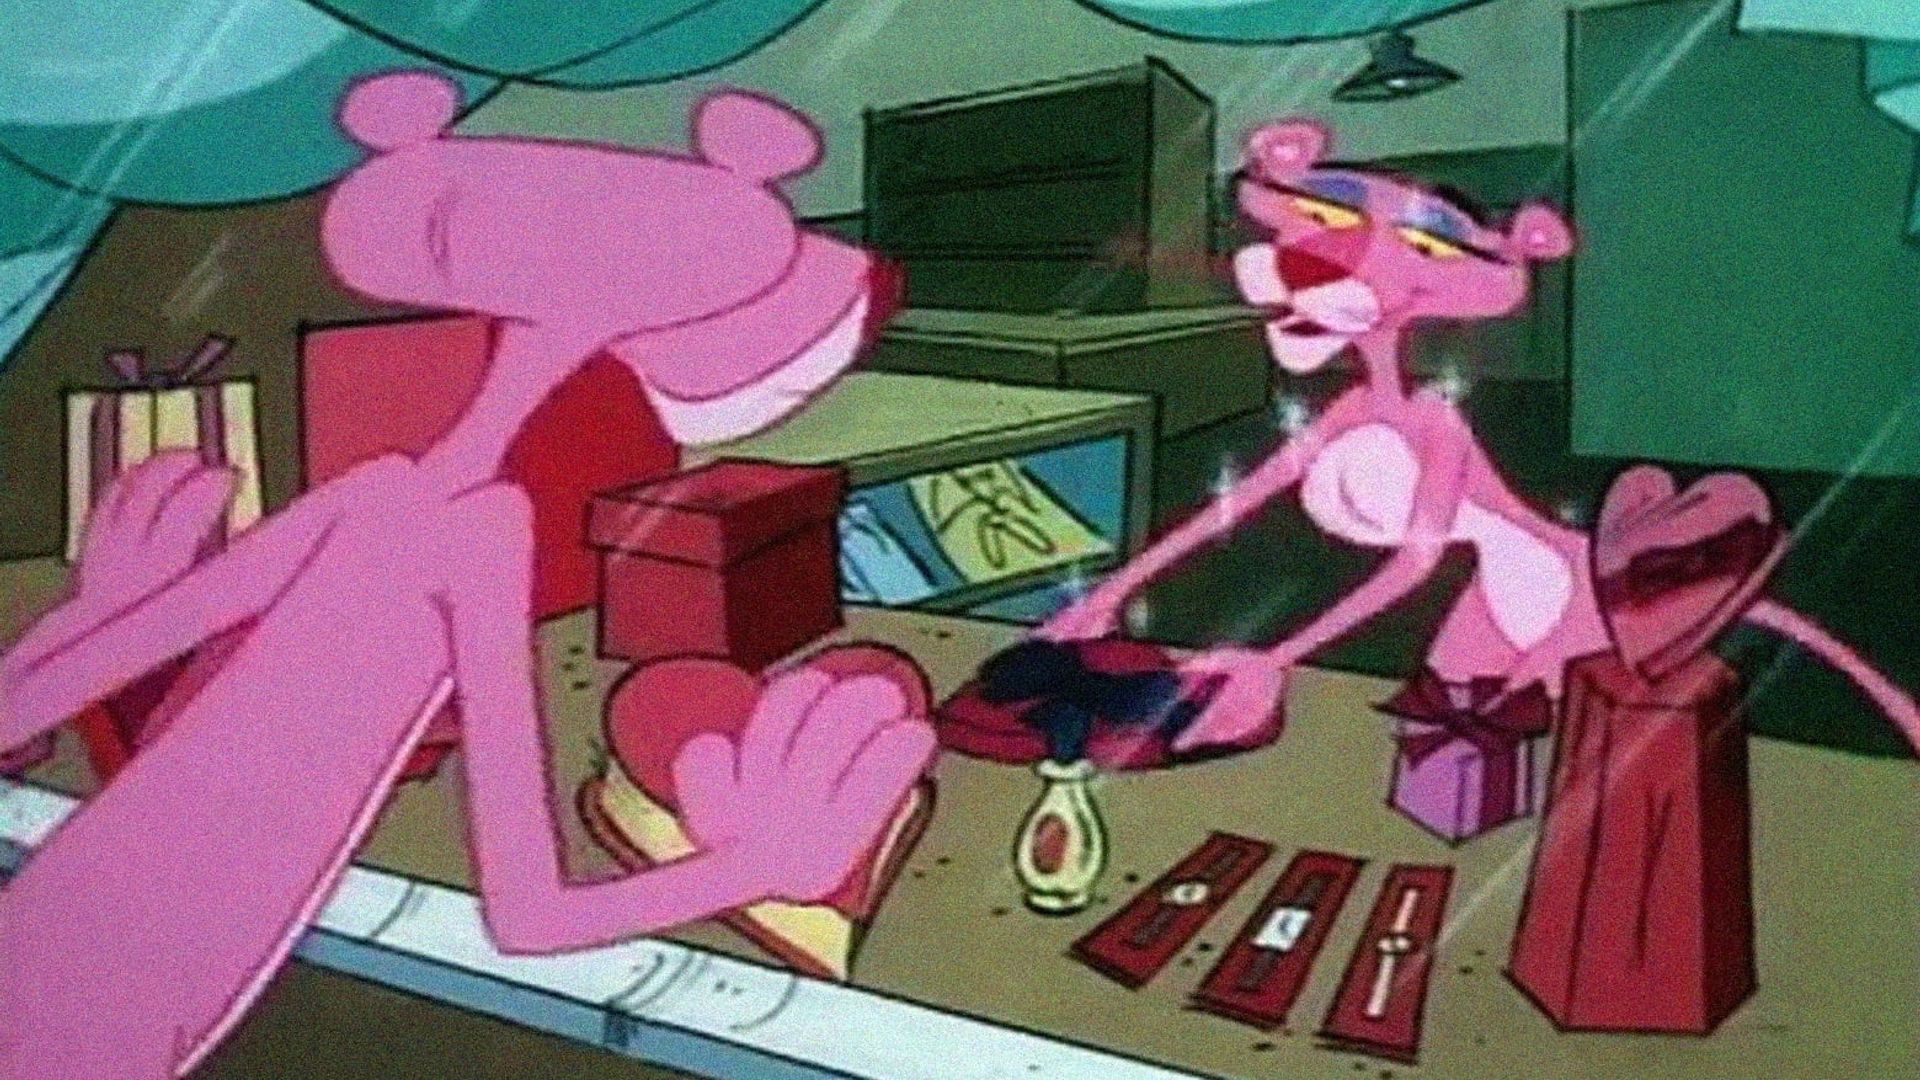 The Pink Panther in 'Pink at First Sight' background